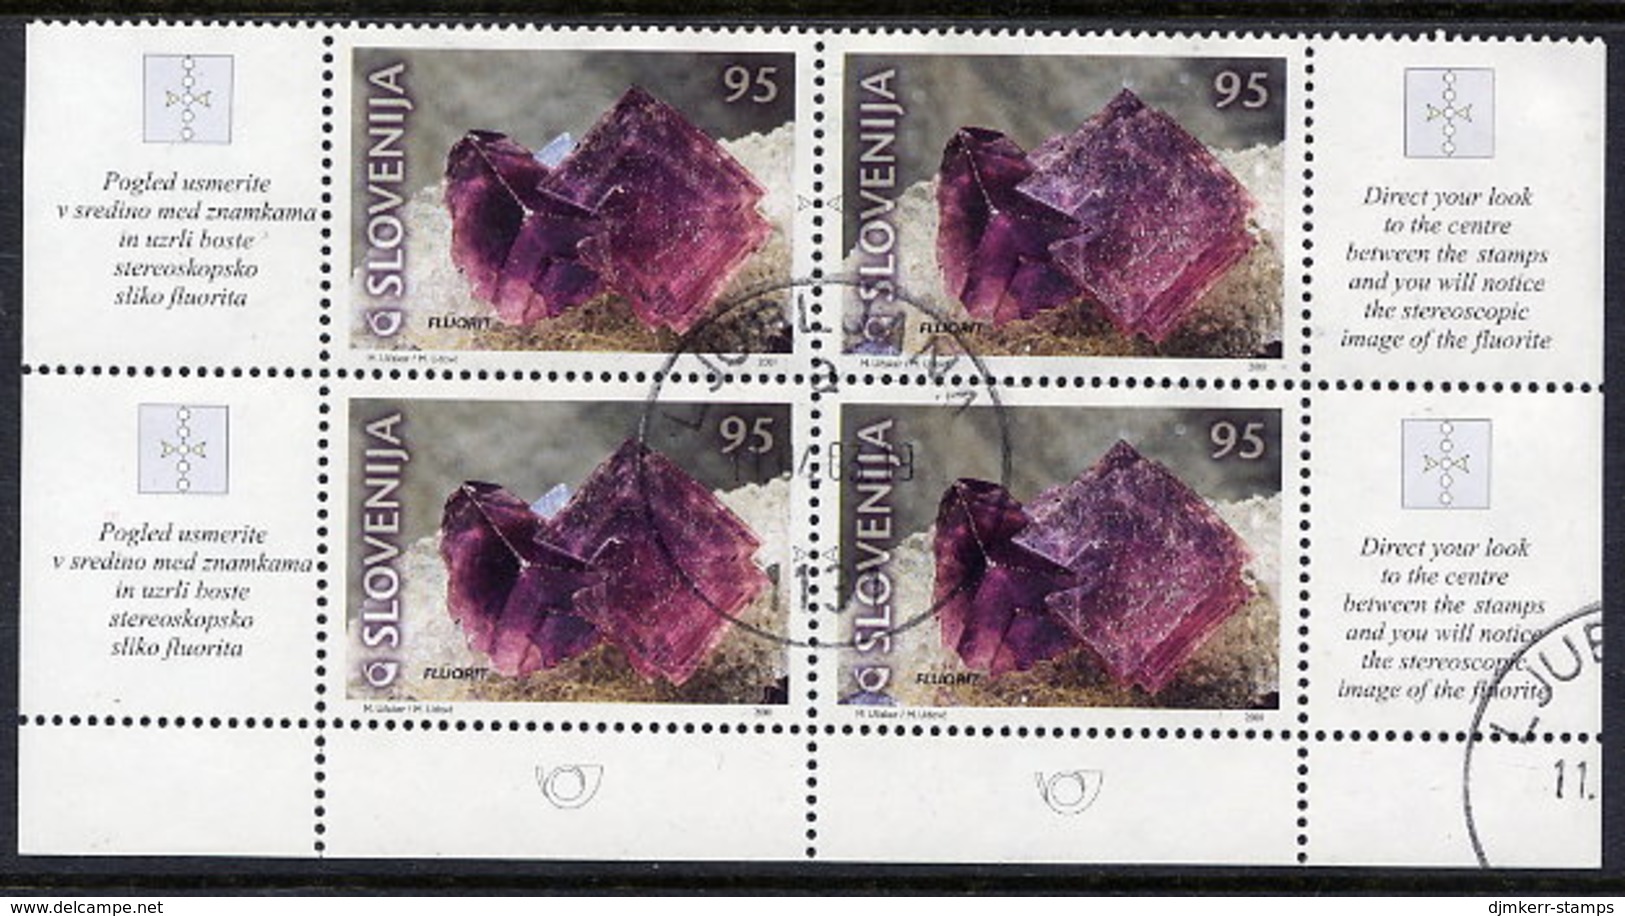 SLOVENIA 2001 Mineral: Fluorite Used Block With Two Pairs. Michel 345-46 - Slovenia